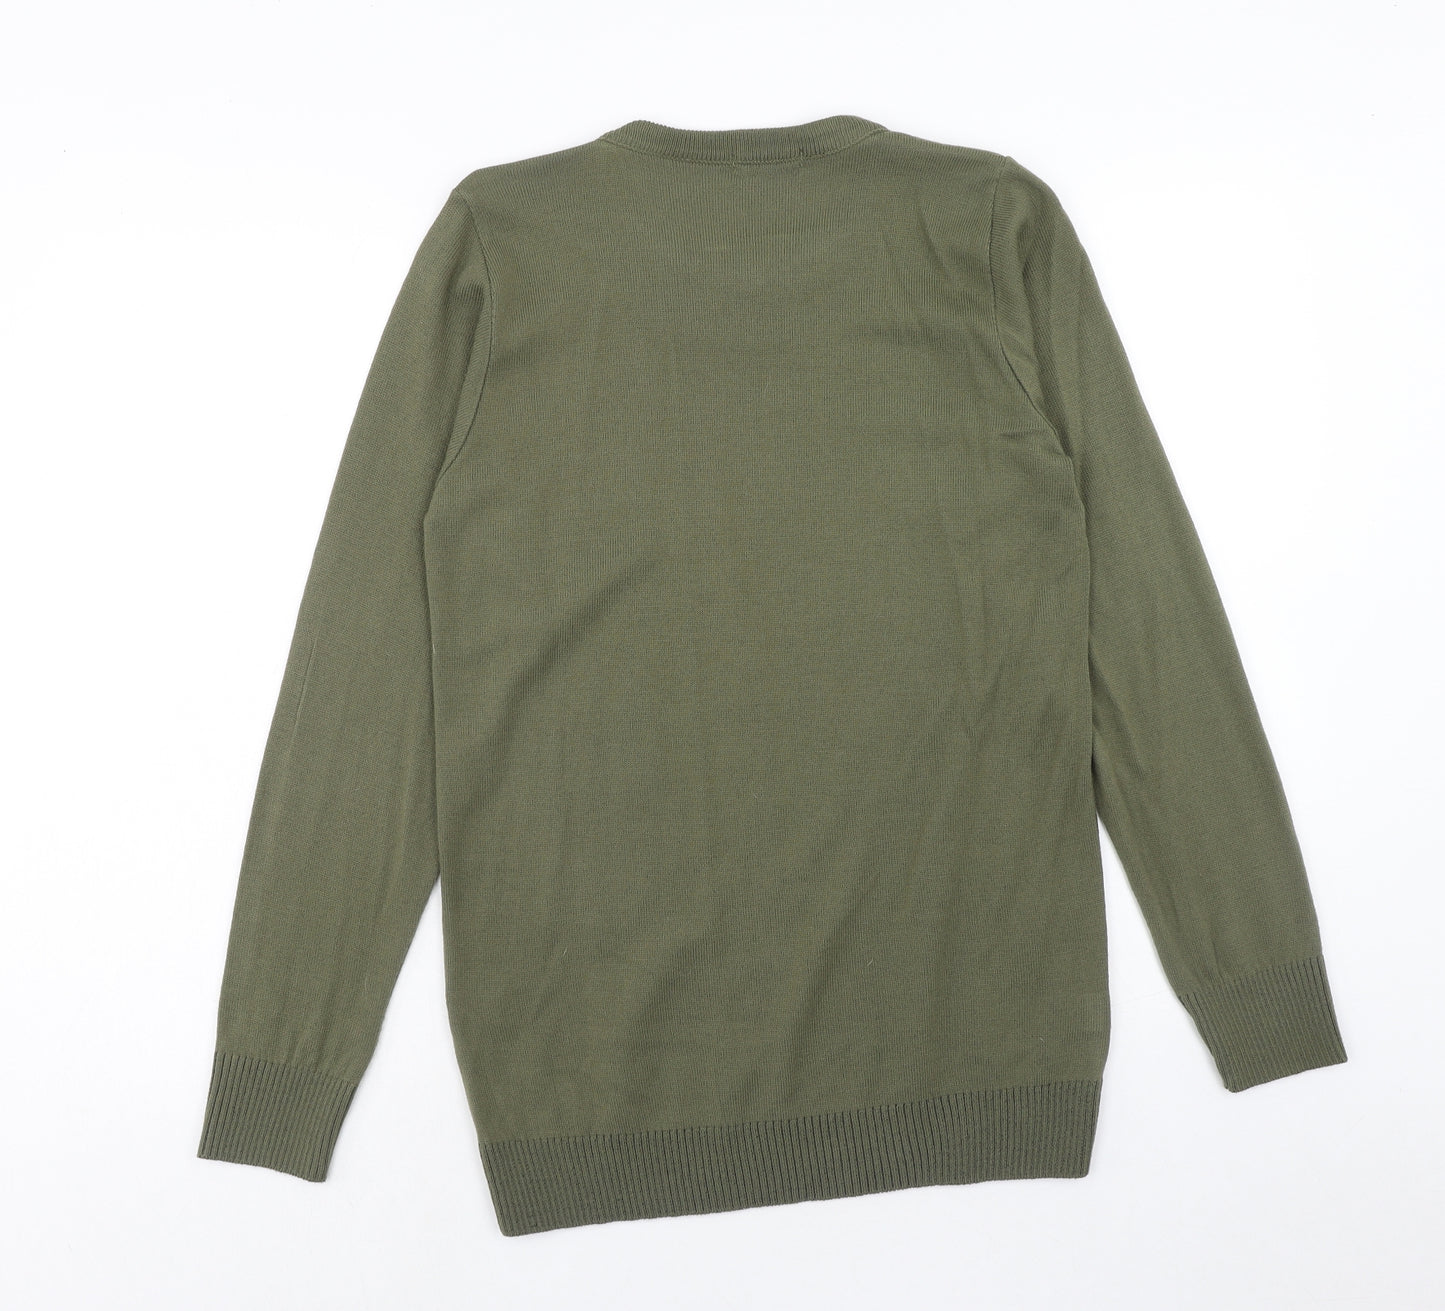 Boohoo Mens Green Round Neck Acrylic Pullover Jumper Size S Long Sleeve